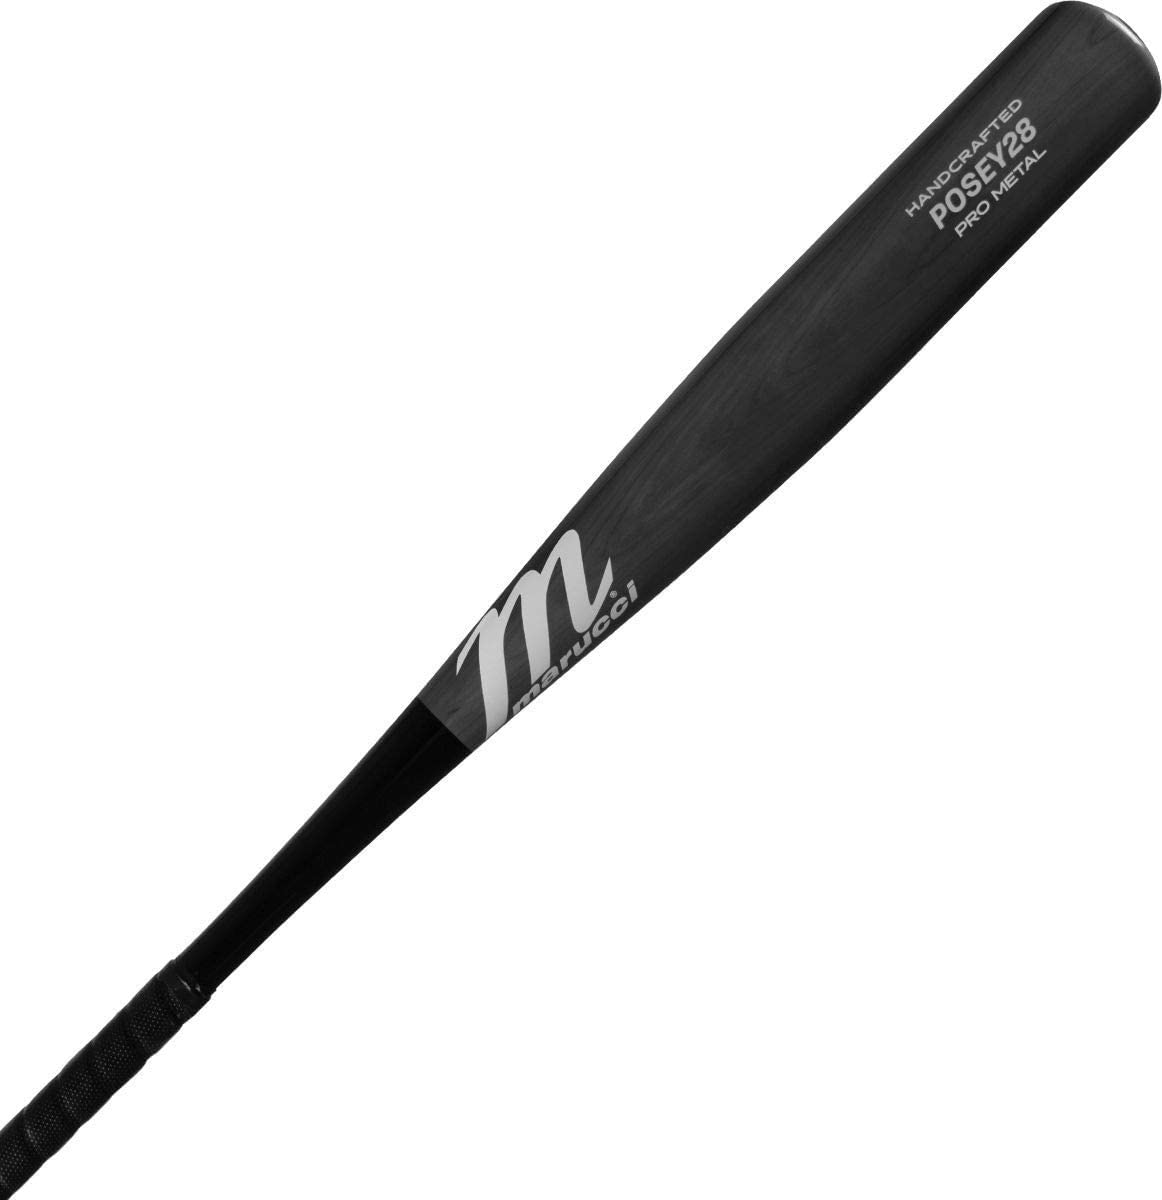 The Marucci Posey Metal Pro baseball bat is constructed from AZ105 alloy, the strongest aluminum on the Marucci bat line, which allows for thinner barrel walls, a higher response rate, and better durability. The multi-variable wall design creates an expanded sweet spot and thinner barrel walls that are more forgiving after off-centered contact. This means that even if you don't hit the ball perfectly in the center of the barrel, you'll still get a good hit. The 2nd Generation AV2 Anti-Vibration knob features an upgraded, finely tuned harmonic dampening system for better feel and less negative vibrational feedback. This means that when you make contact with the ball, you'll feel less of the vibrations that can cause discomfort and affect your swing. The ring-free barrel construction allows for more barrel flex and increases performance with no dead spots. This means that the entire barrel is responsive and provides consistent performance. Additionally, the one-piece alloy construction provides a clean, consistent, traditional swing, allowing you to focus on your swing without worrying about the bat's construction. Overall, the Marucci bat is an excellent choice for players looking for a high-performance bat that offers a great balance of strength, durability, and performance. With its advanced features and design, this bat is sure to help you take your game to the next level.